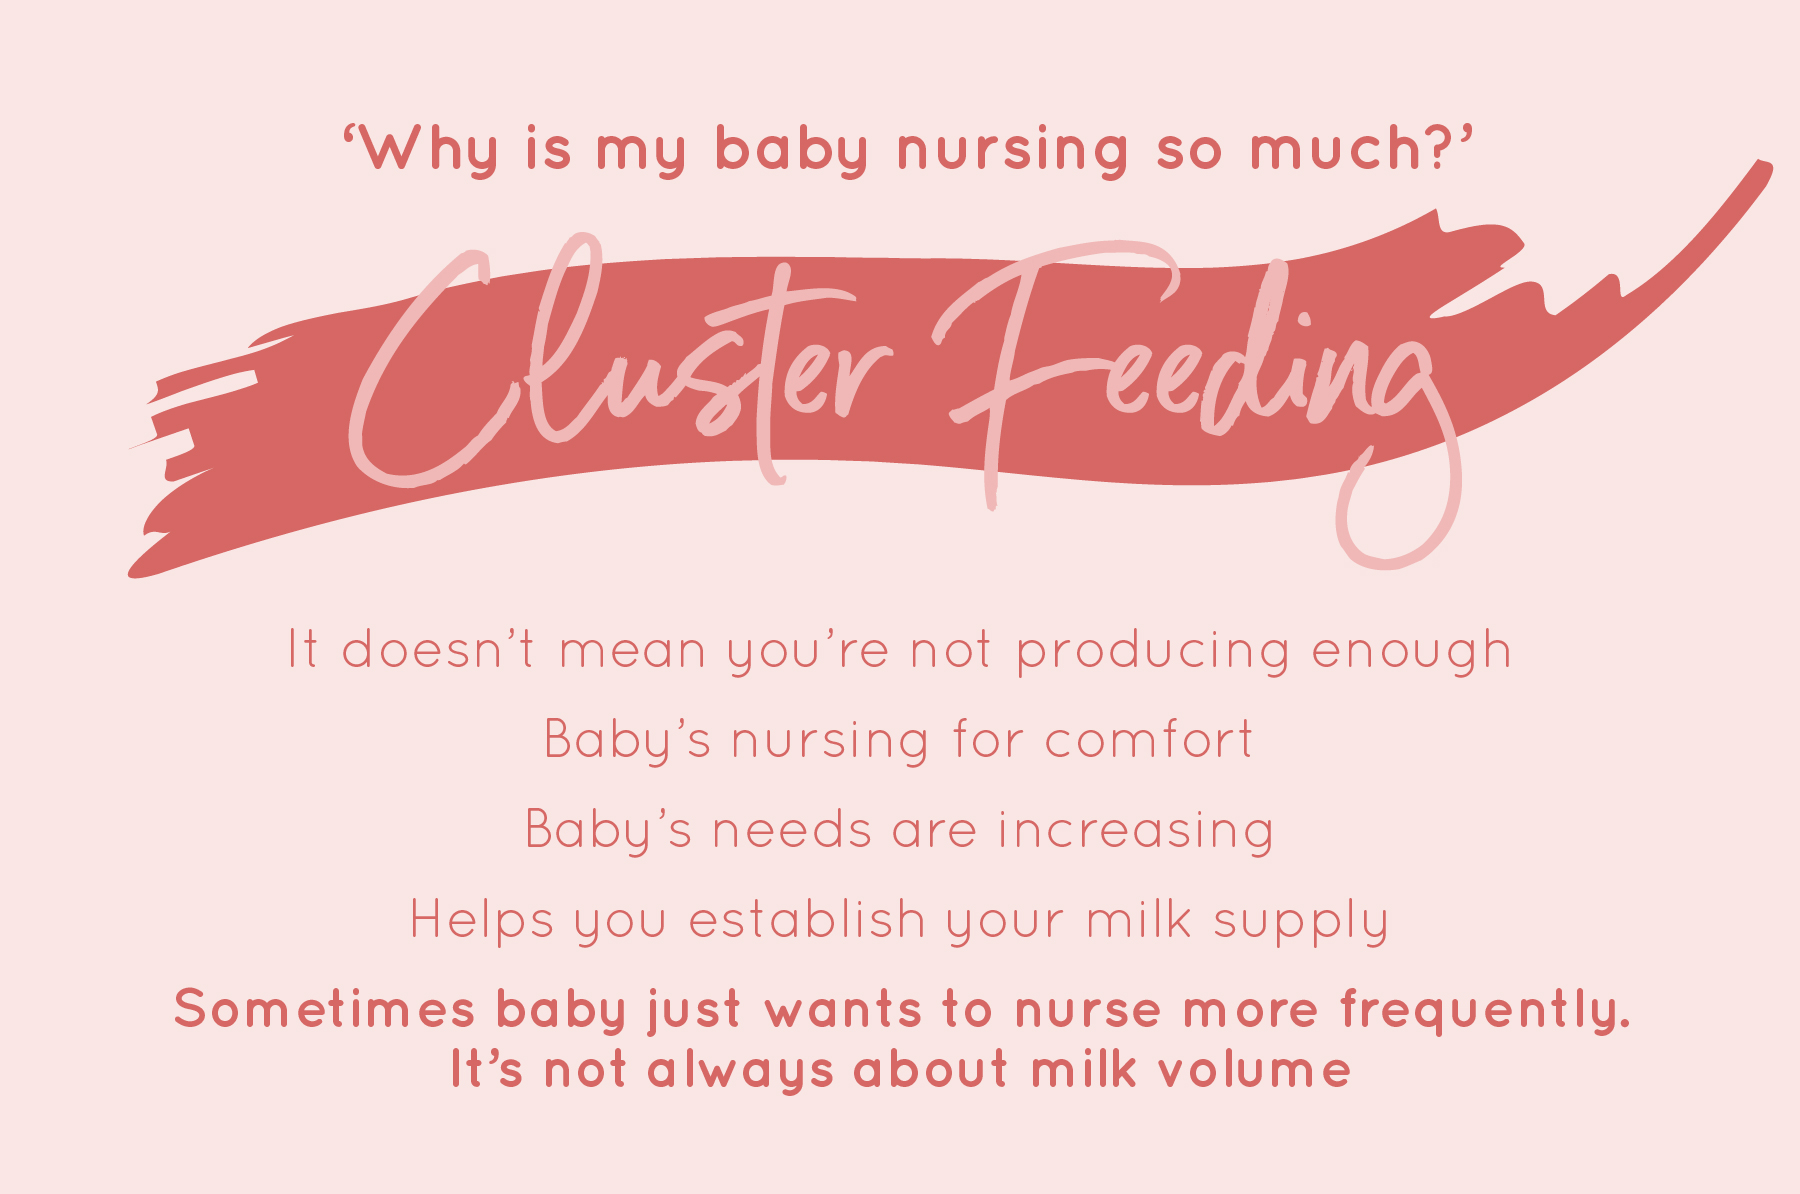 Establishing and maintaining milk supply when baby is not